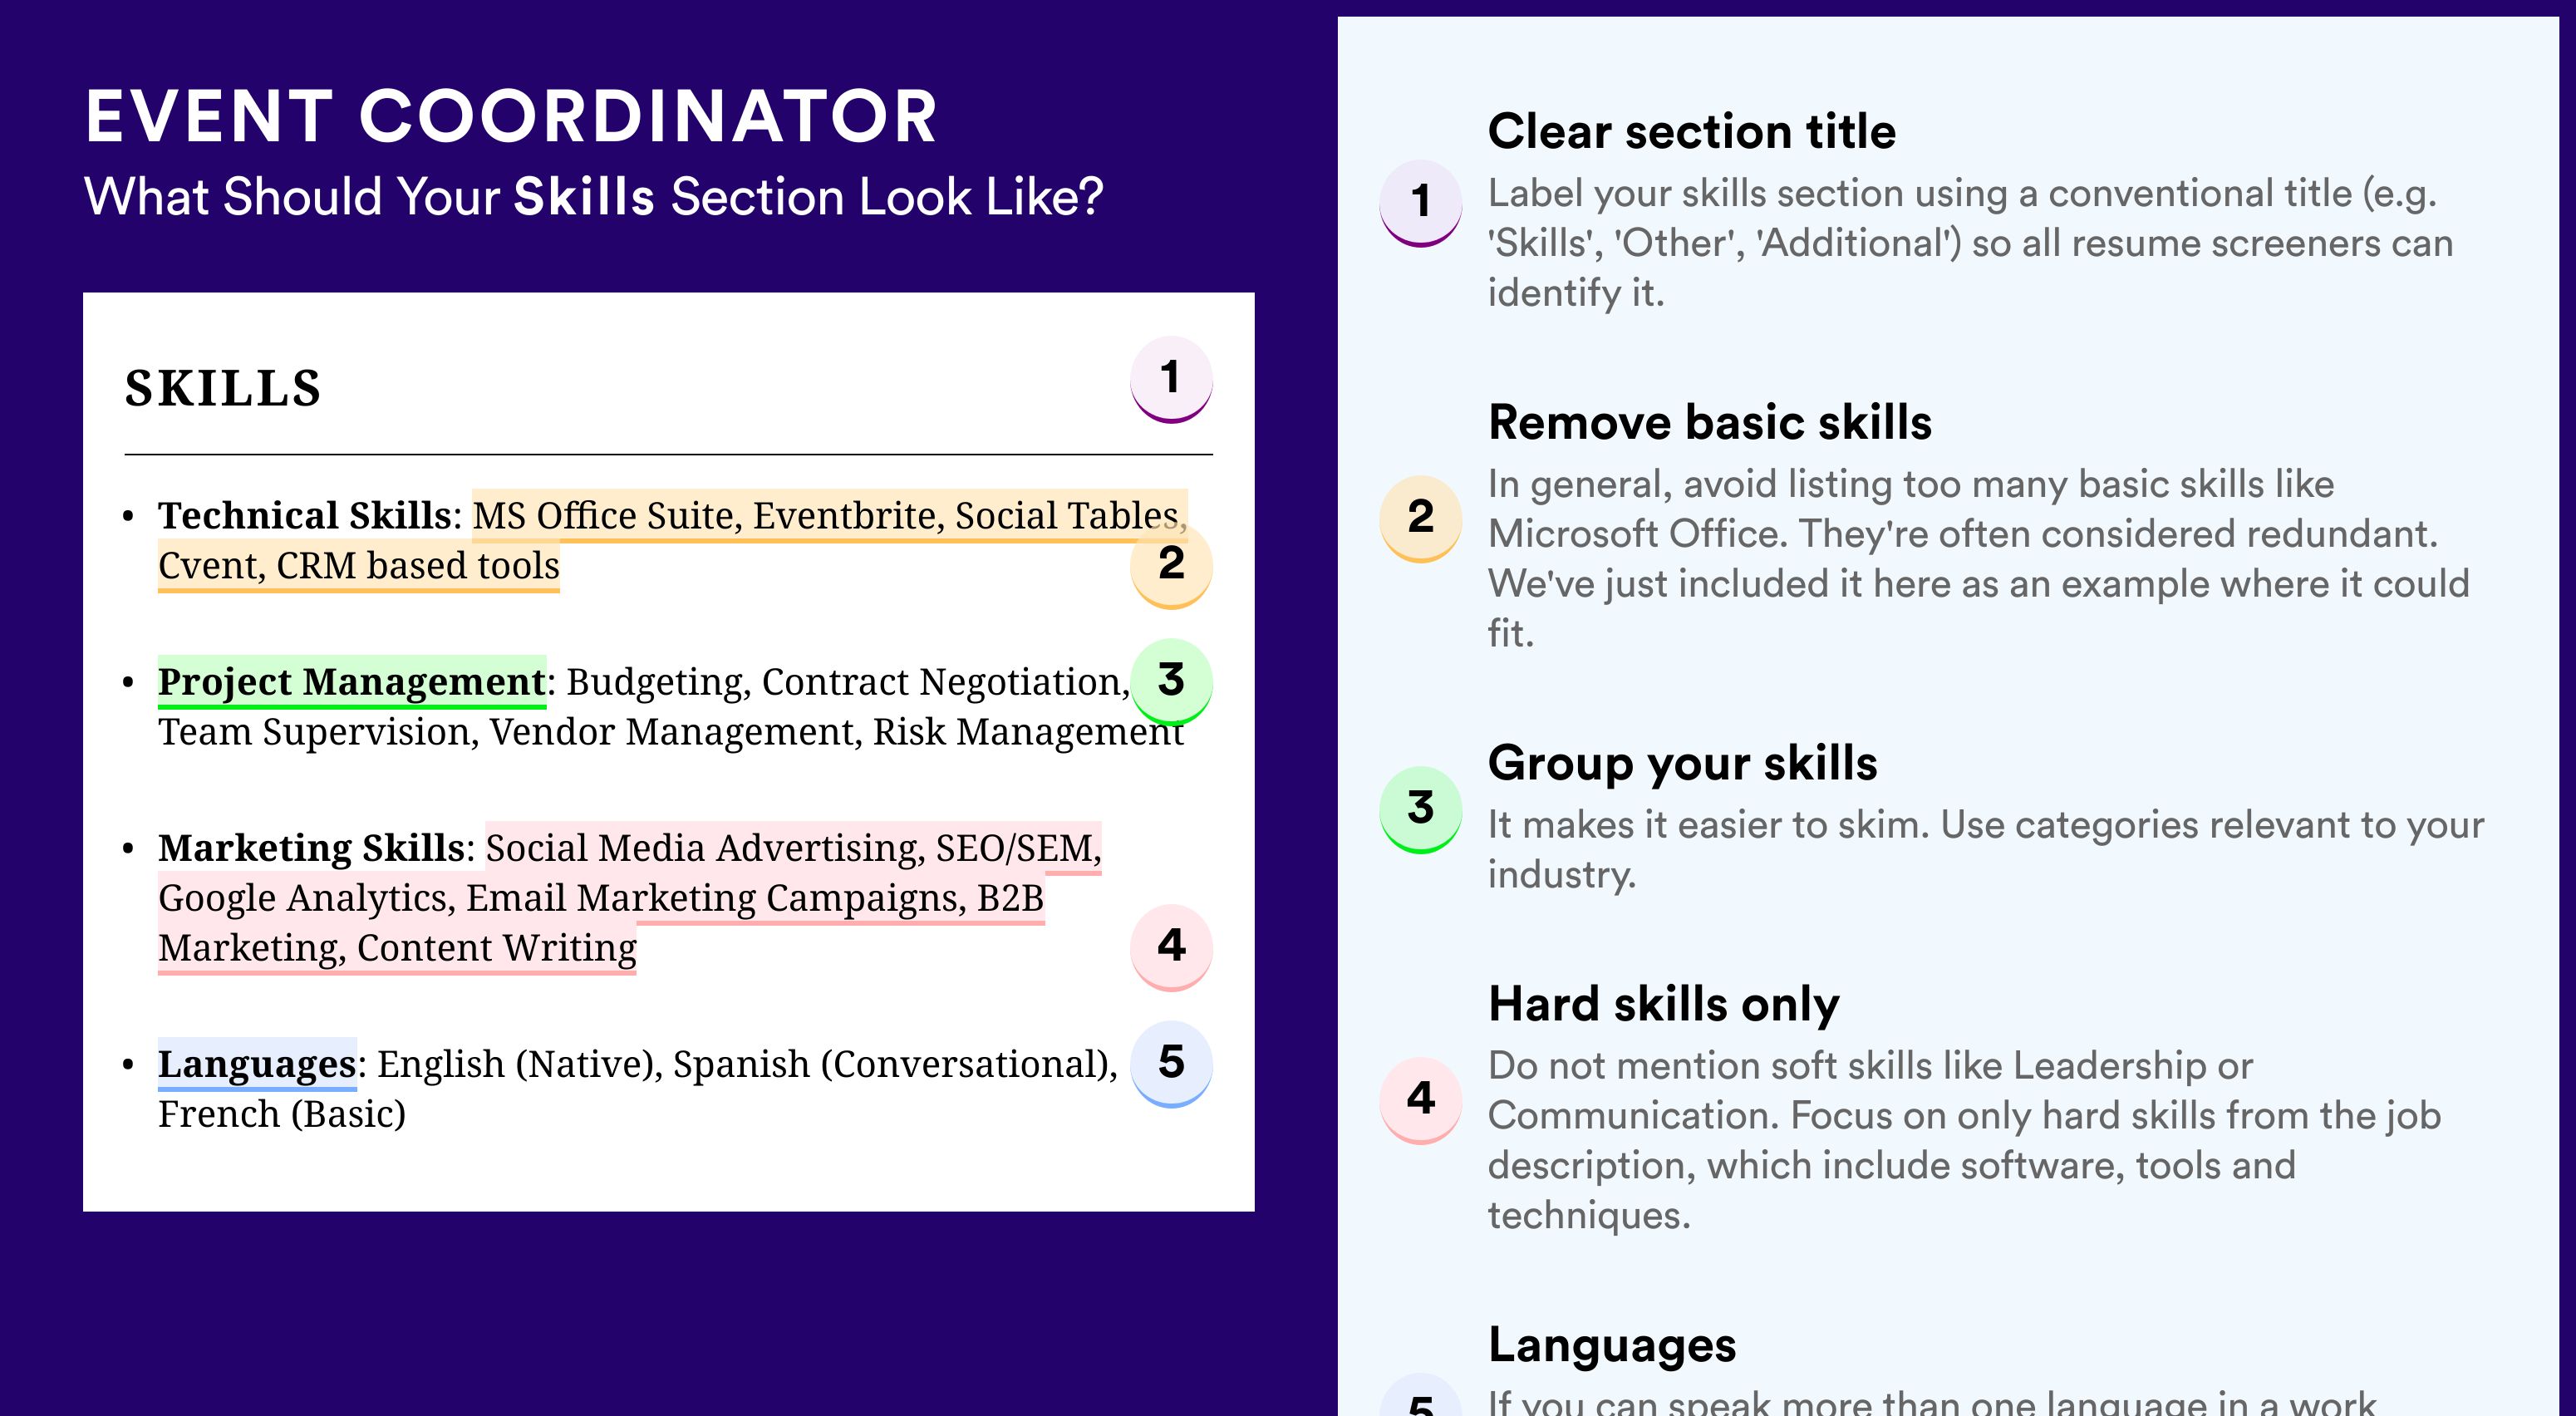 How To Write Your Skills Section - Event Coordinator Roles